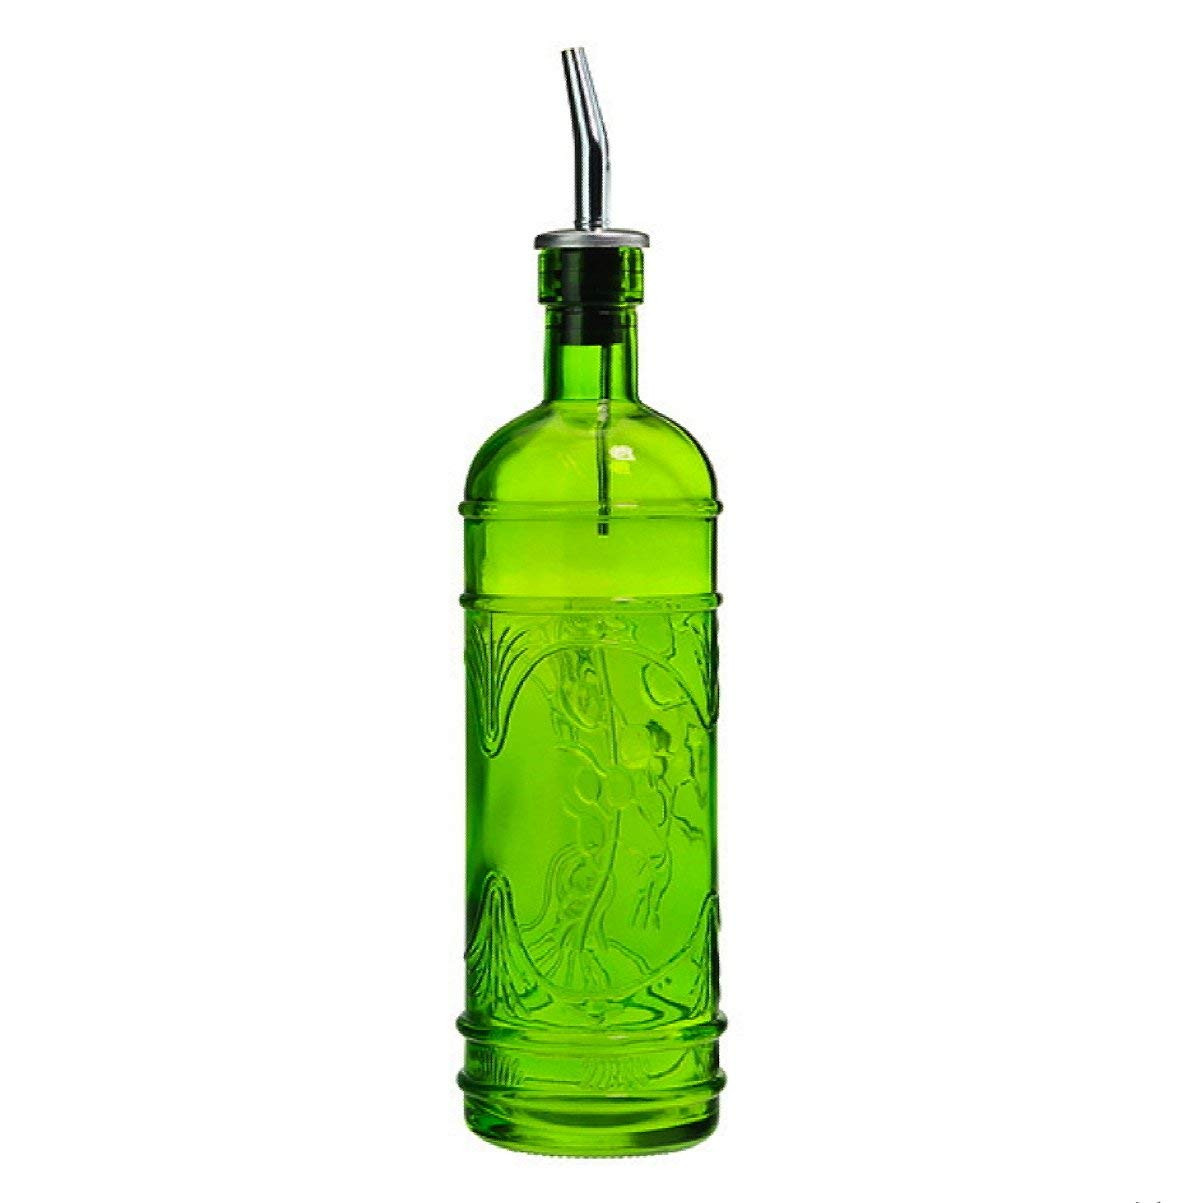 25 attractive Green and Gold Glass Vase 2024 free download green and gold glass vase of amazon com unique kitchen olive oil liquid dish or hand soap glass within amazon com unique kitchen olive oil liquid dish or hand soap glass bottle dispenser g24